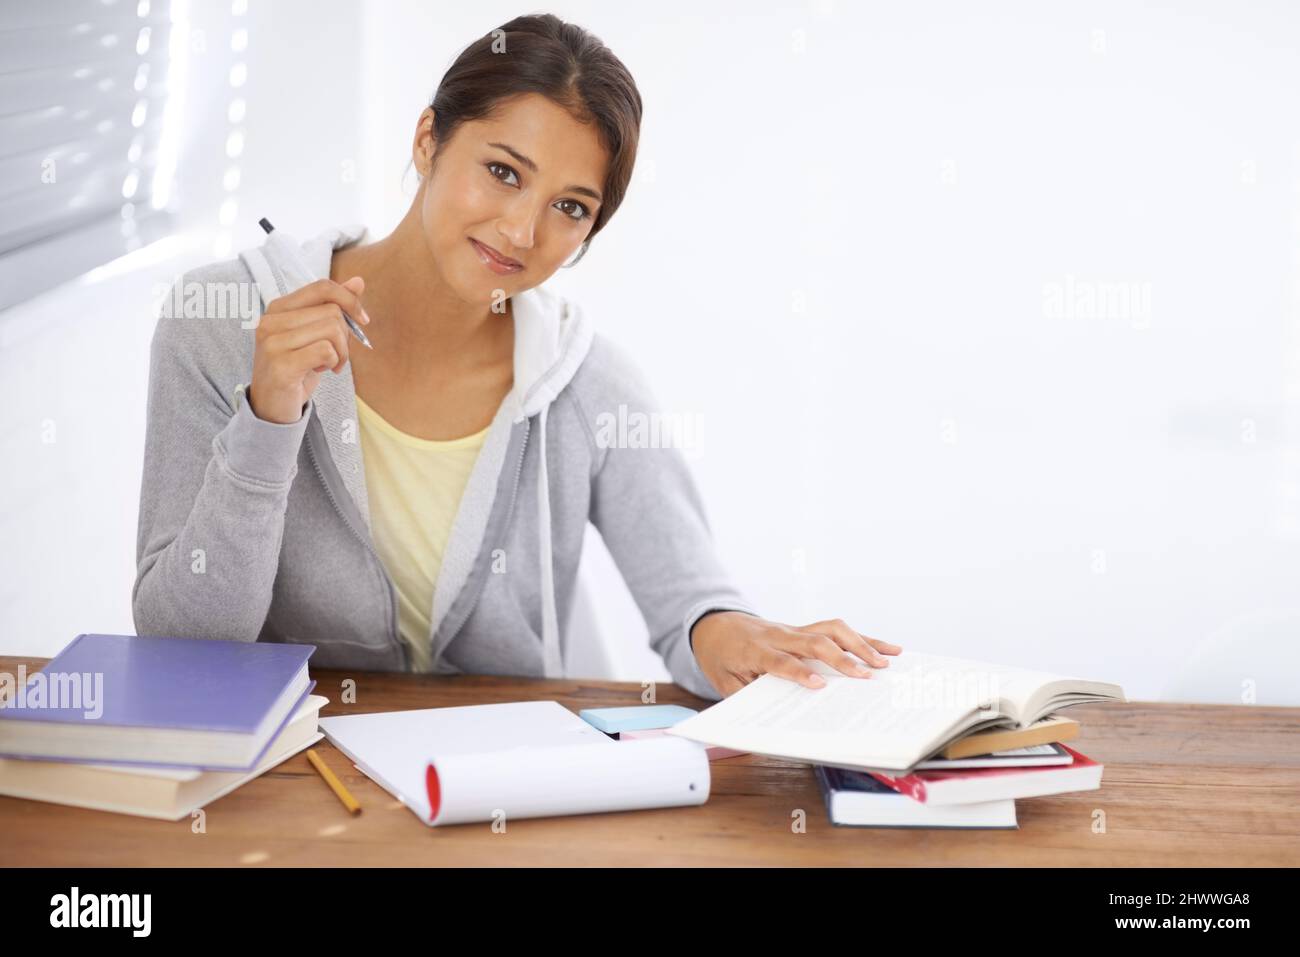 Hitting the books with a positive attitude. A pretty young university student studying for her finals in her dorm room. Stock Photo